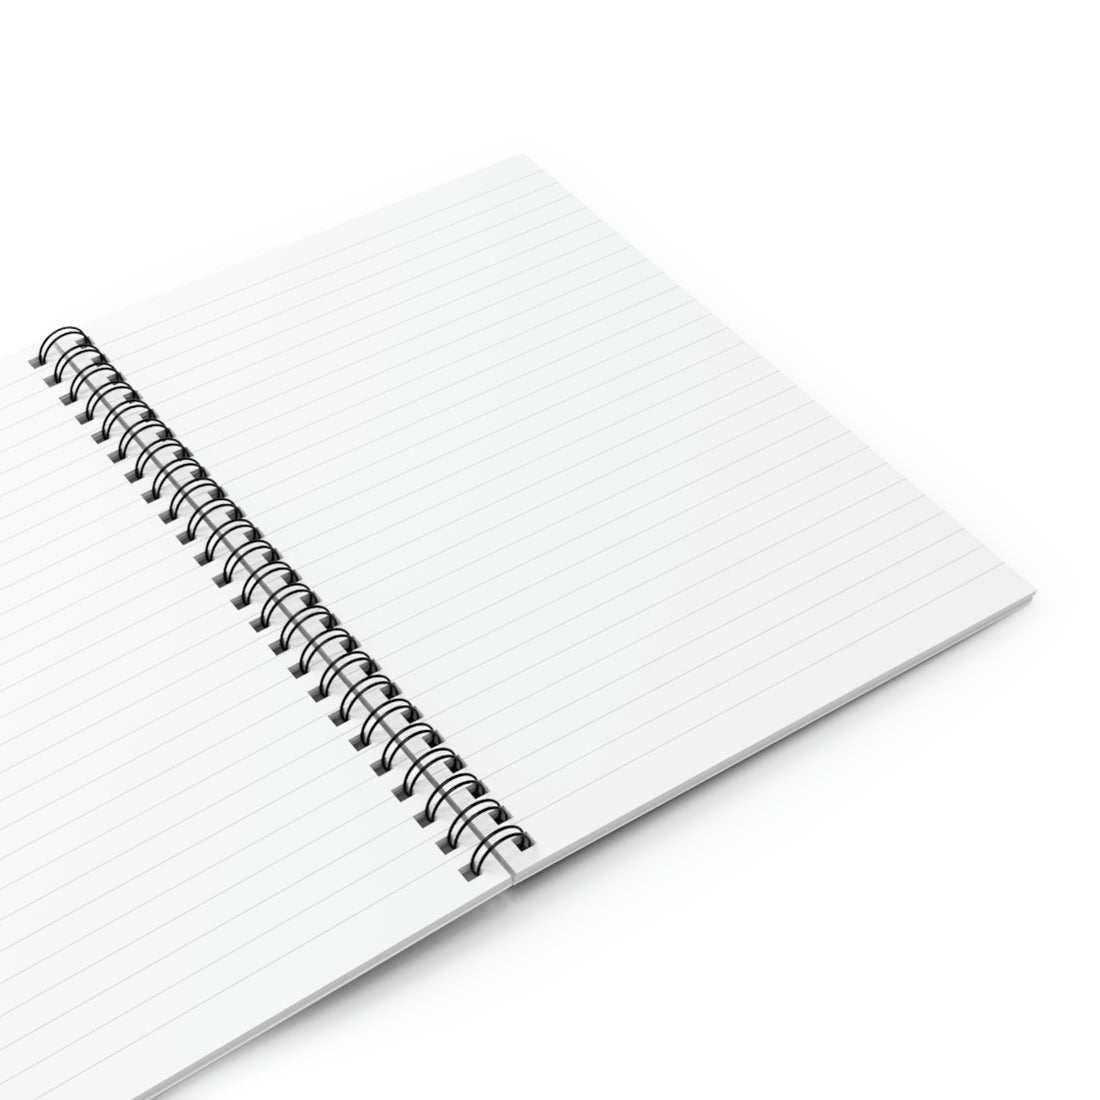 A Special Rose - Spiral Notebook - Ruled Line